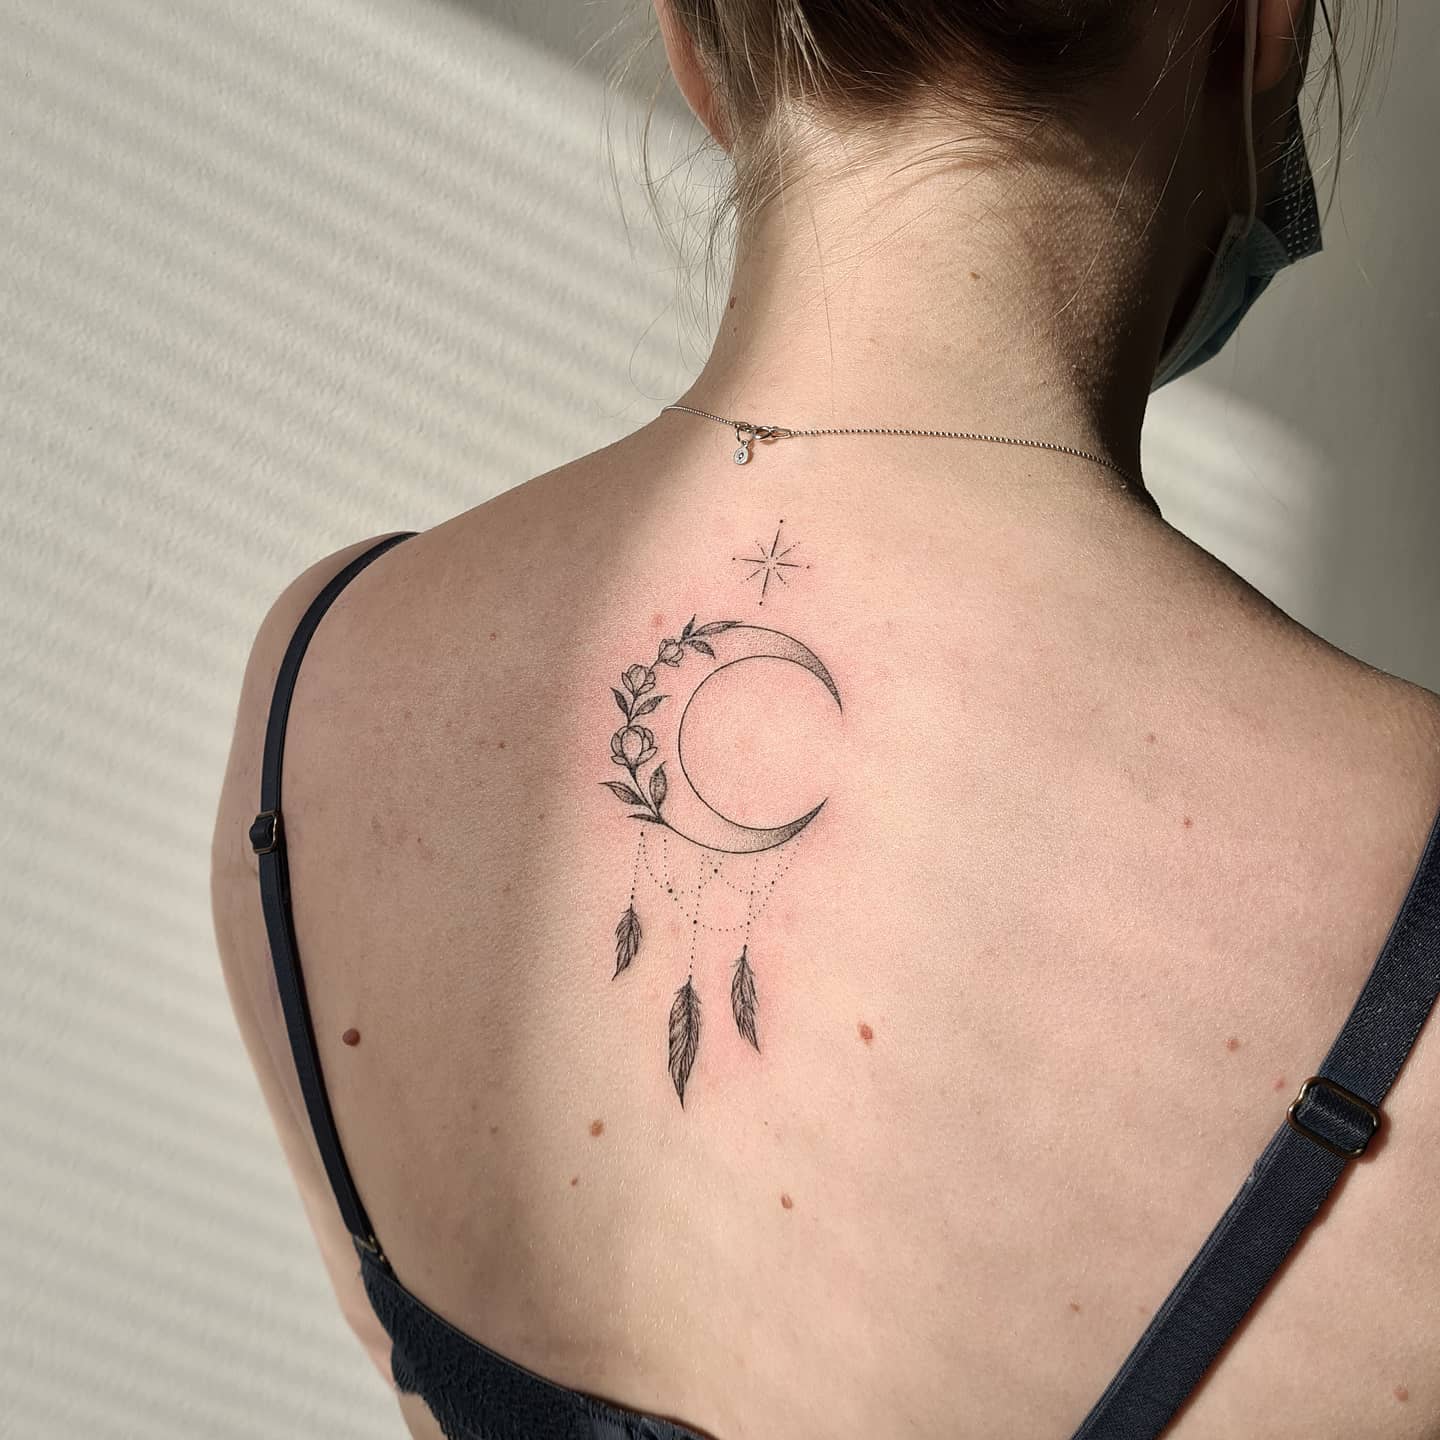 The tattoo has flowers around the edges of the dreamcatcher, with a moon in the center of it. This floral moon dream catcher is a great way to get a little bit of nature in your life. It's a symbol of balance and peace, which are the things we all need more of.